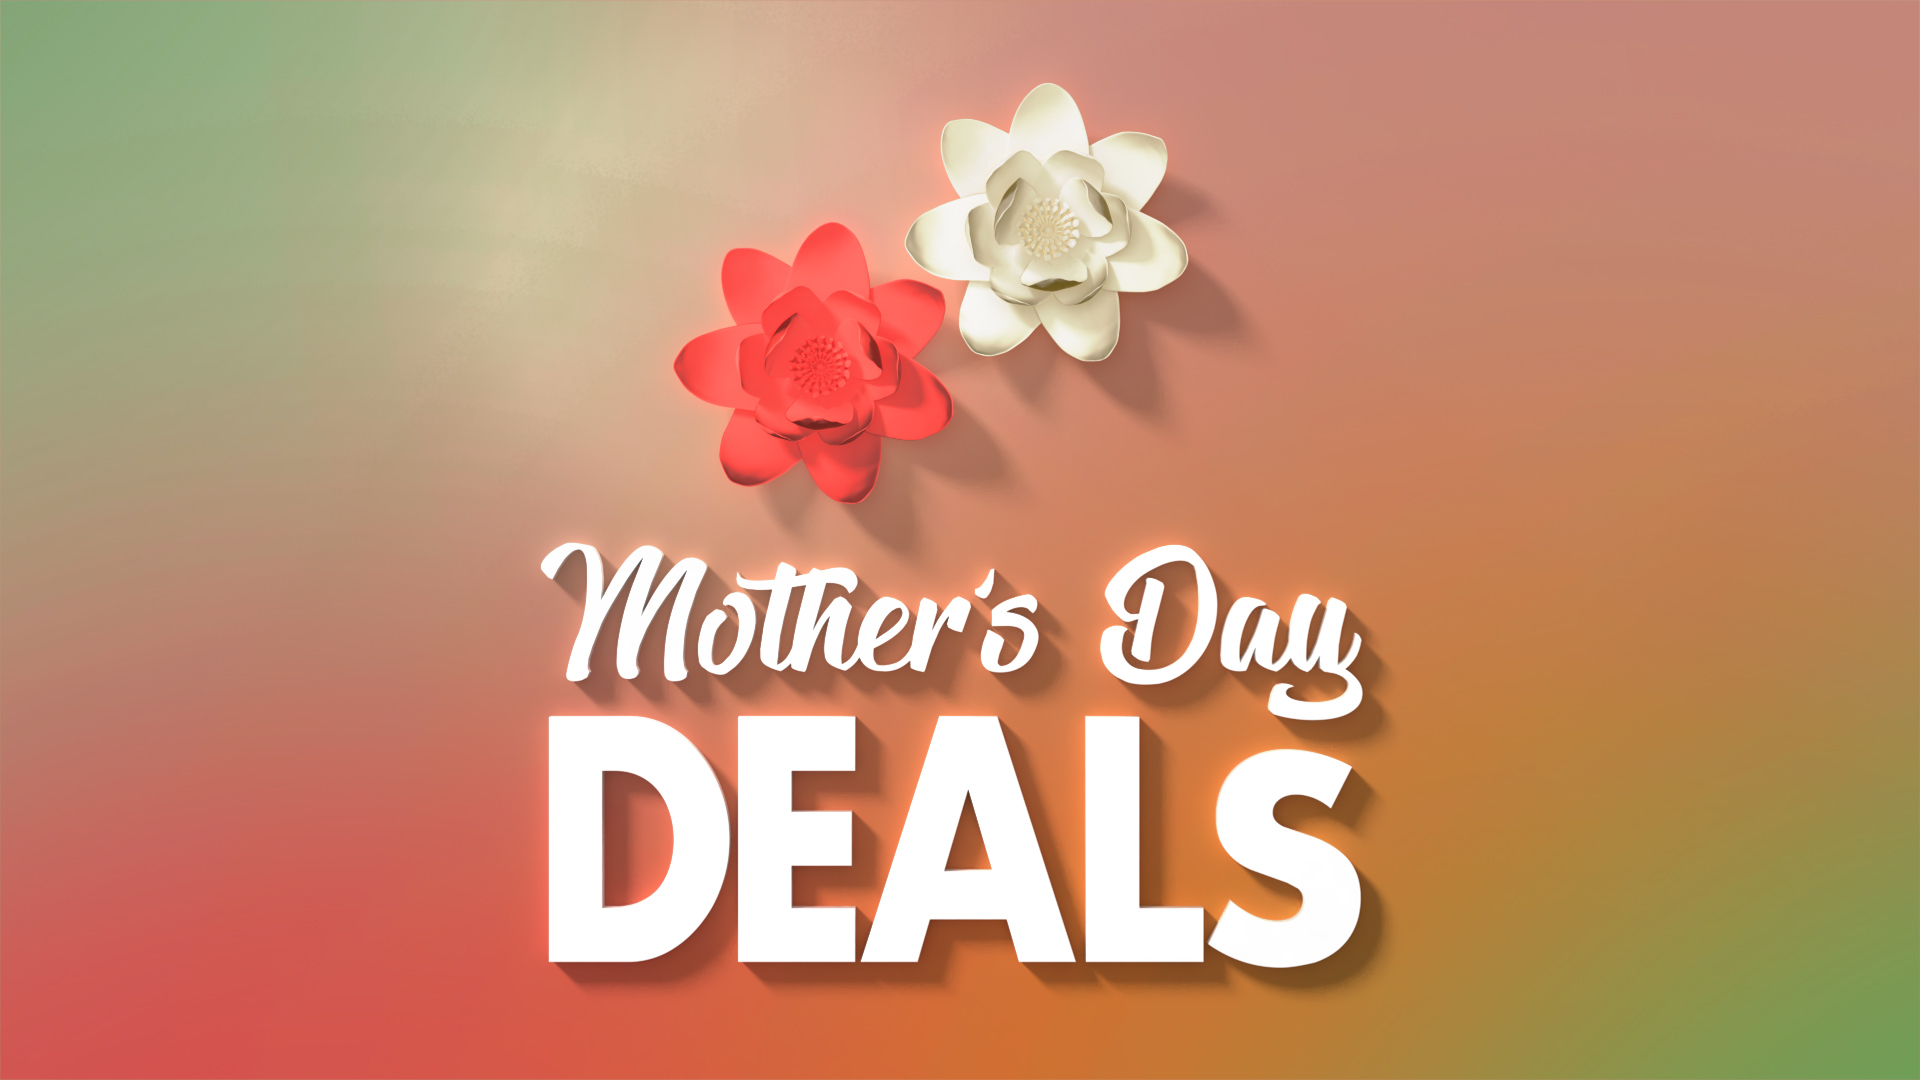 mother's day deals kitchen sink lowes